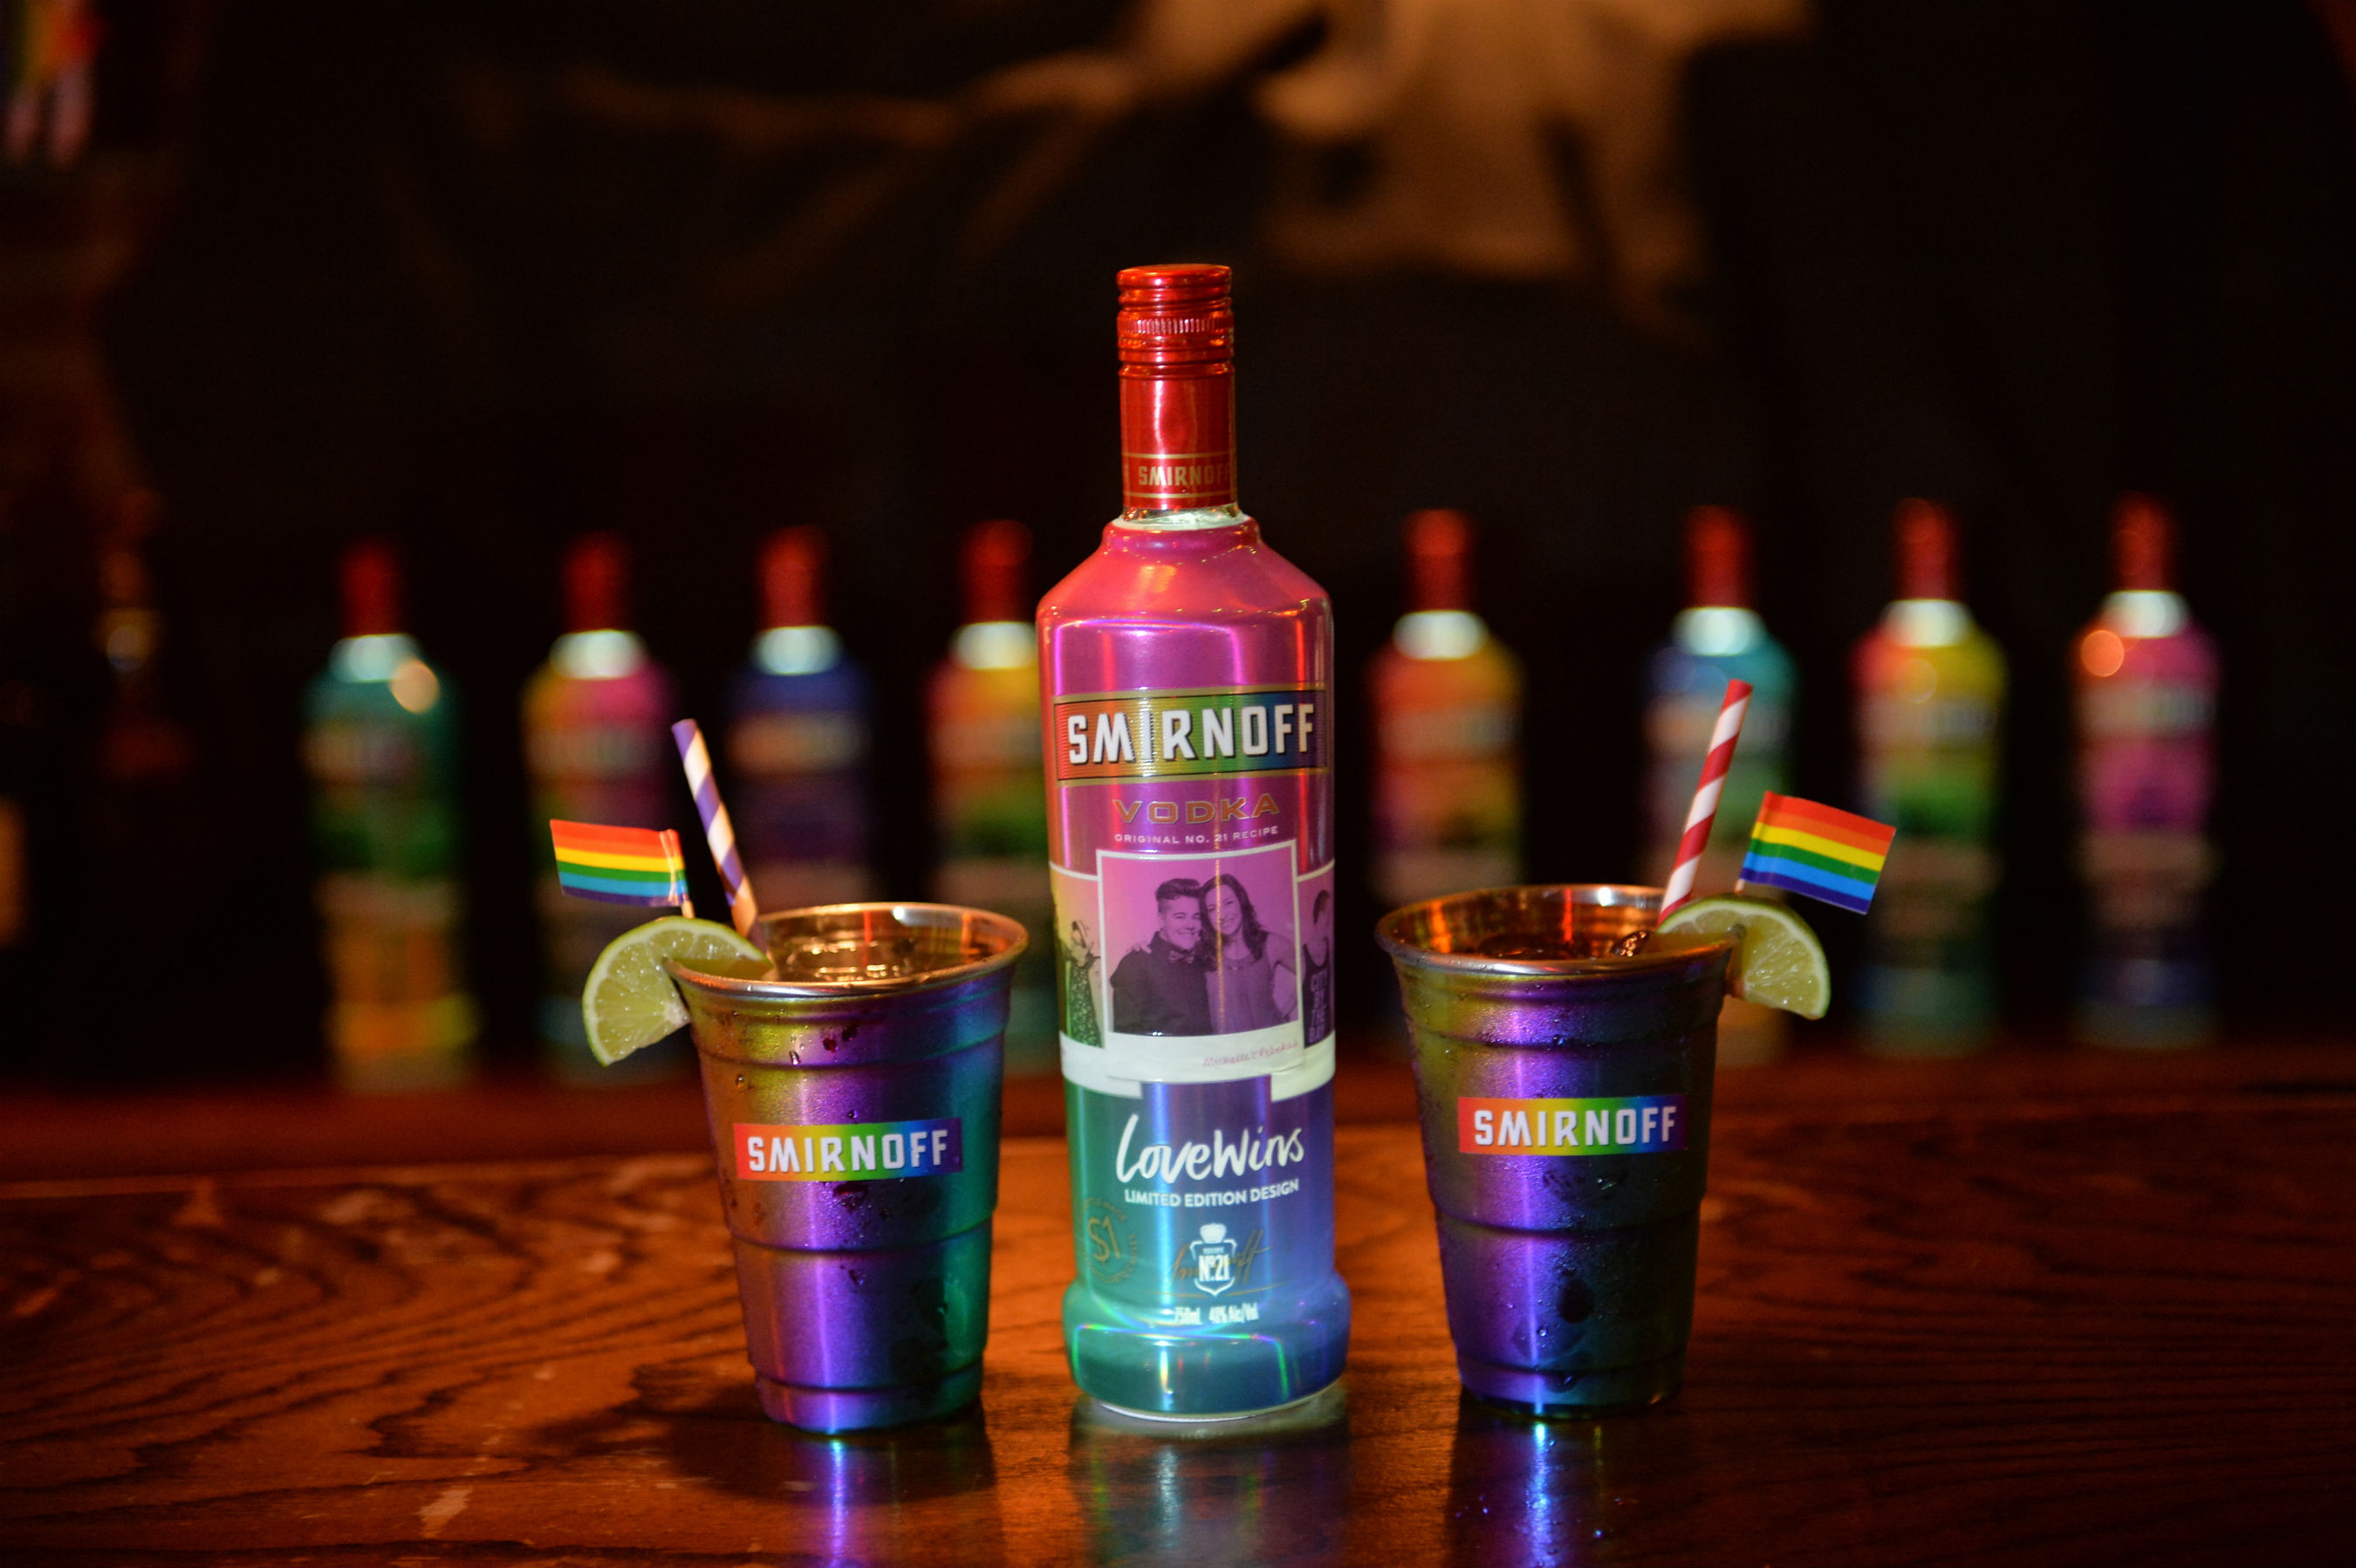 SMIRNOFF launches SMIRNOFF No. 21 Vodka “Love Wins” limited edition bottles in support of the Human Rights Campaign to celebrate inclusivity and love in all its forms in New York City on Thursday, May 18, 2017.